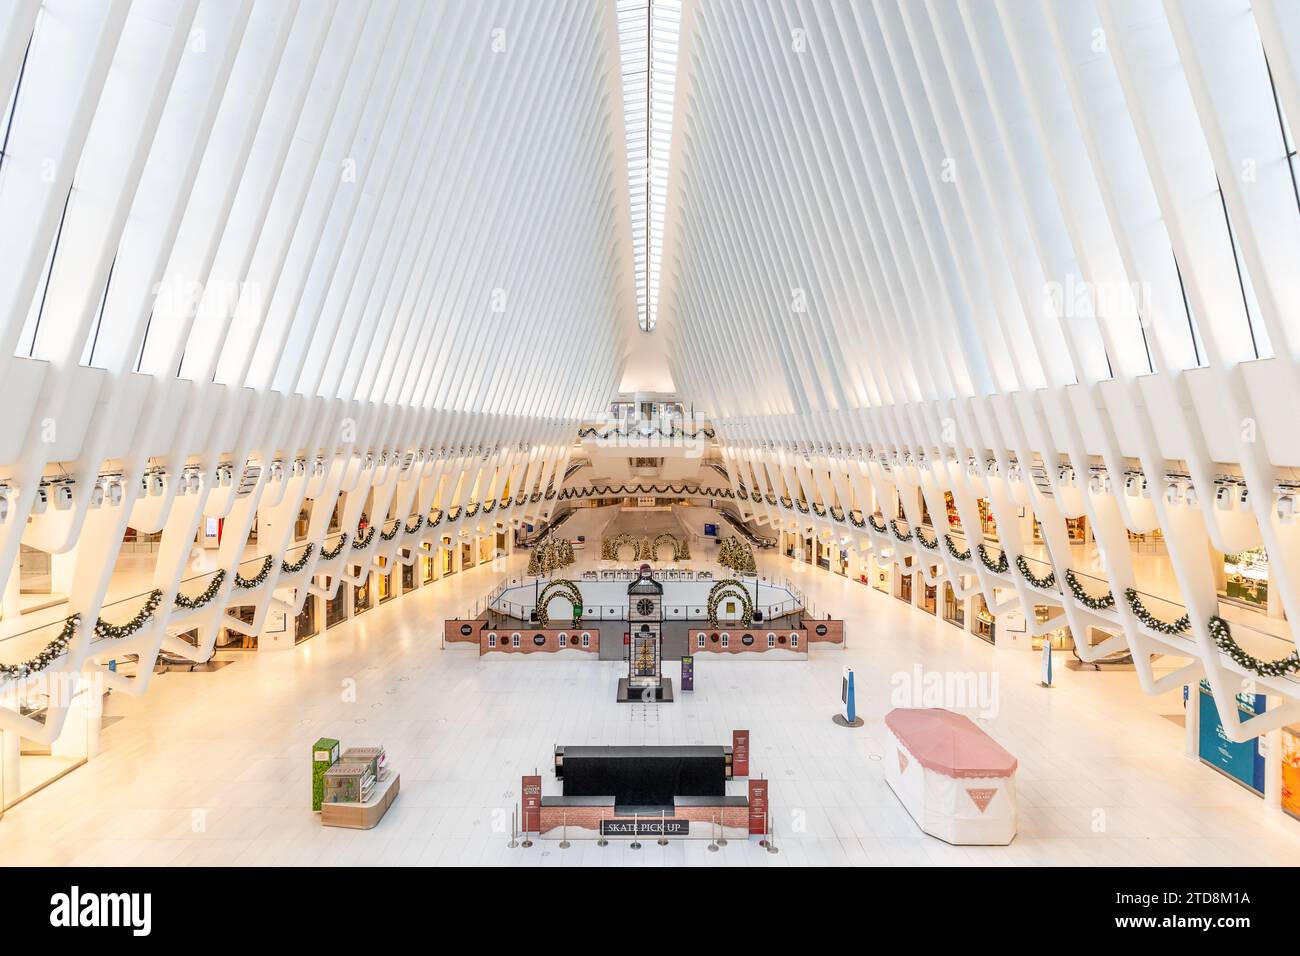 The Oculus, also known as the Westfield World Trade Center, is a shopping mall complex and transportation hub. Stock Photo